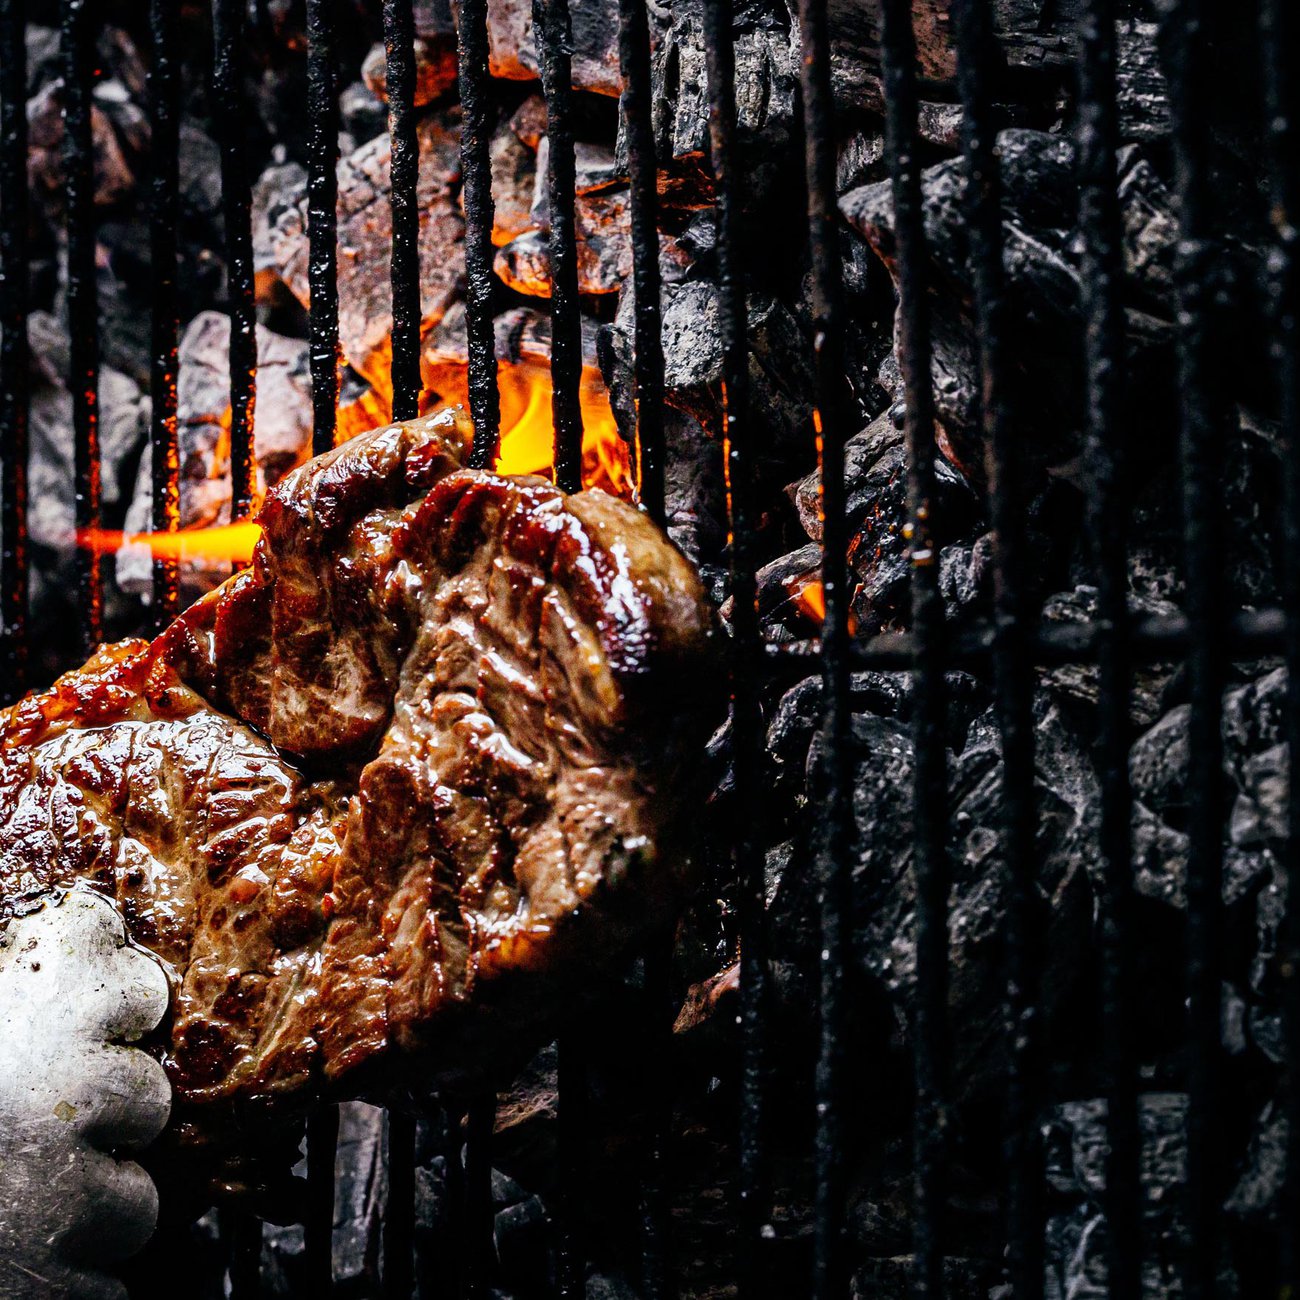 Some flip their steak only once, others flip often - see which is right for you